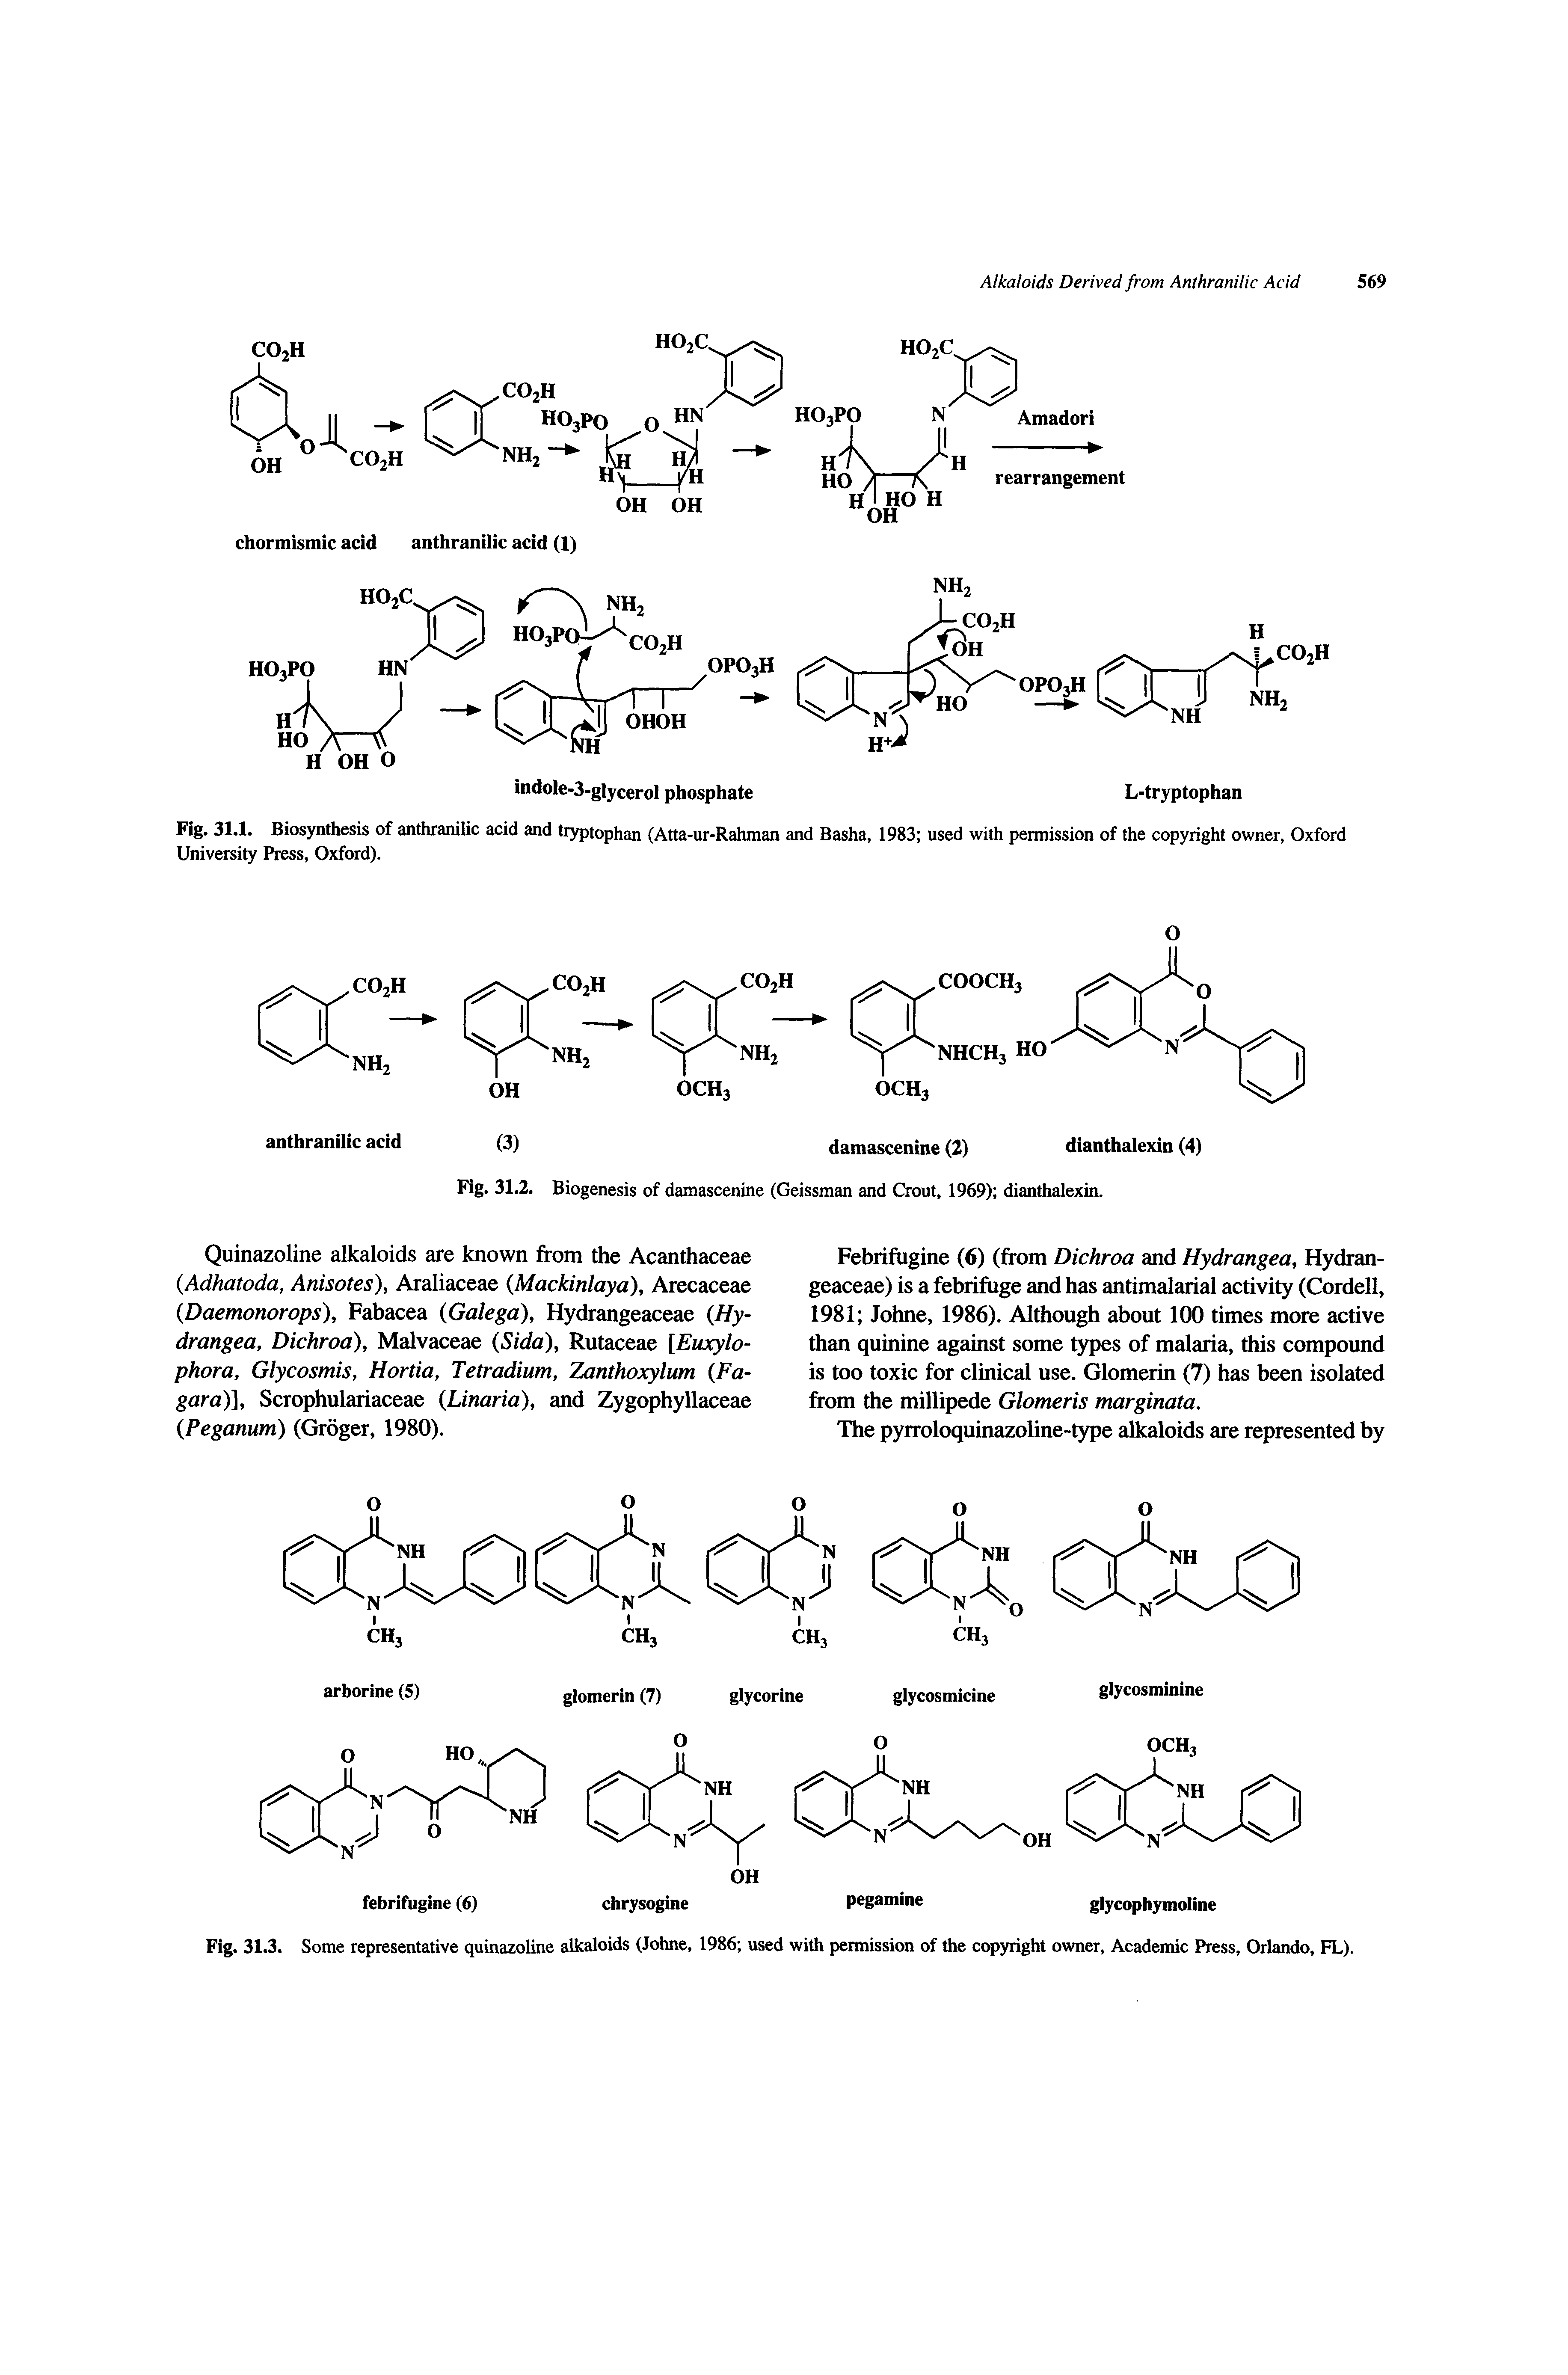 Fig. 31.1. Biosynthesis of anthranilic acid and tryptophan (Atta-ur-Rahman and Basha, 1983 used with permission of the copyright owner, Oxford University Press, Oxford).